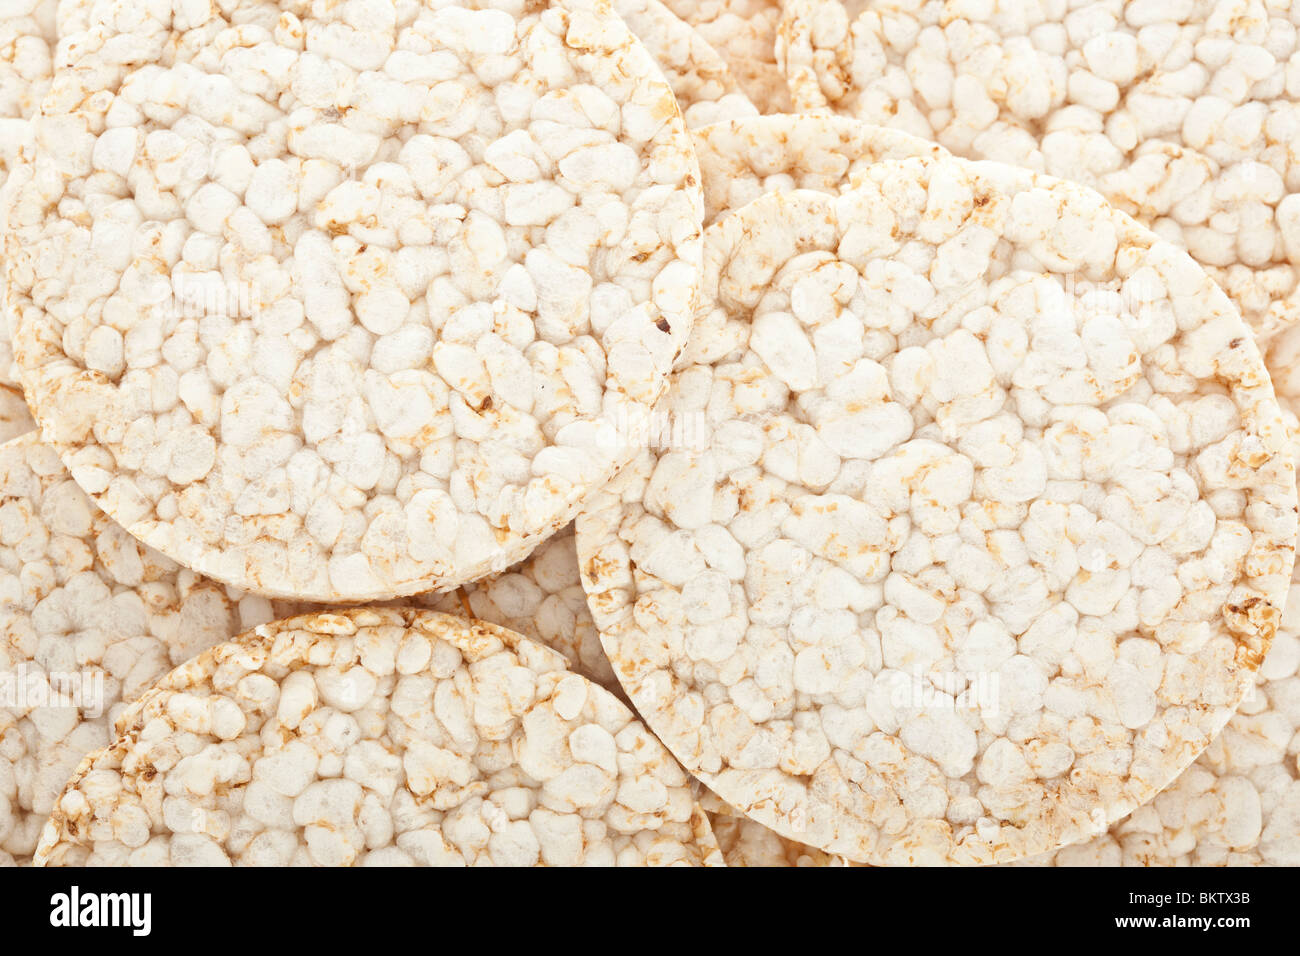 Background made of rice cakes pile Stock Photo